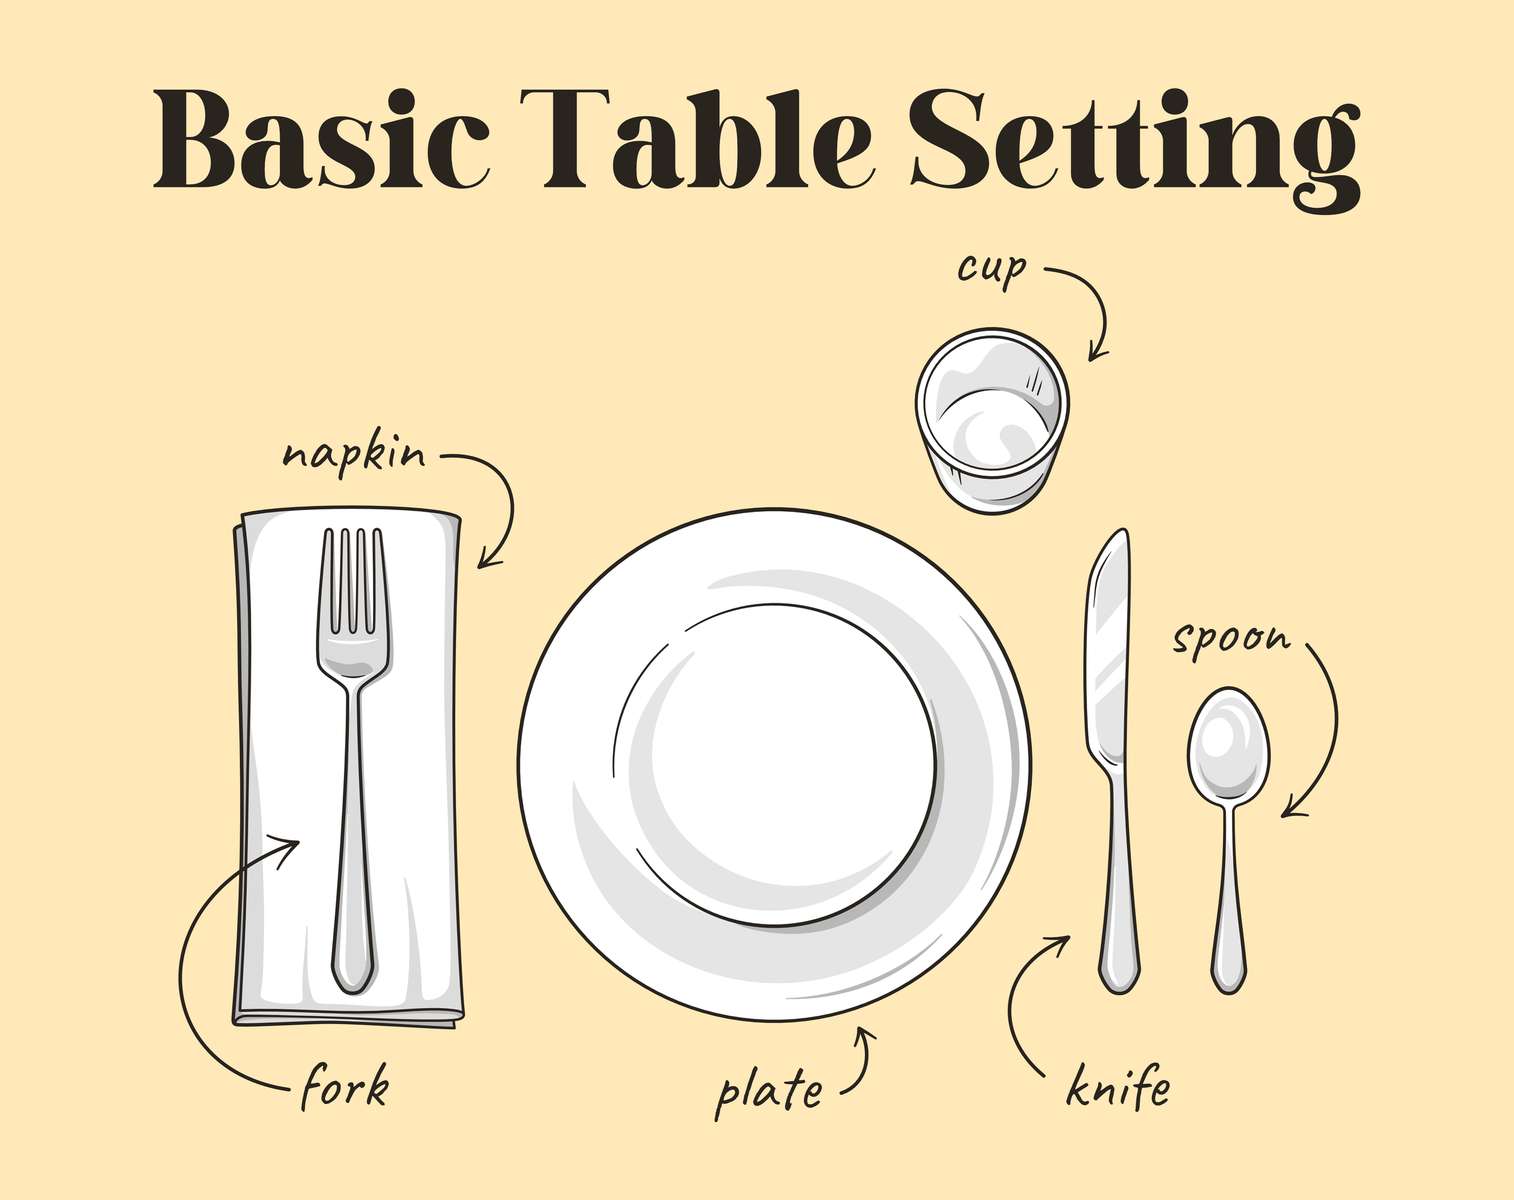 BASIC TABLE SETTING puzzle online from photo